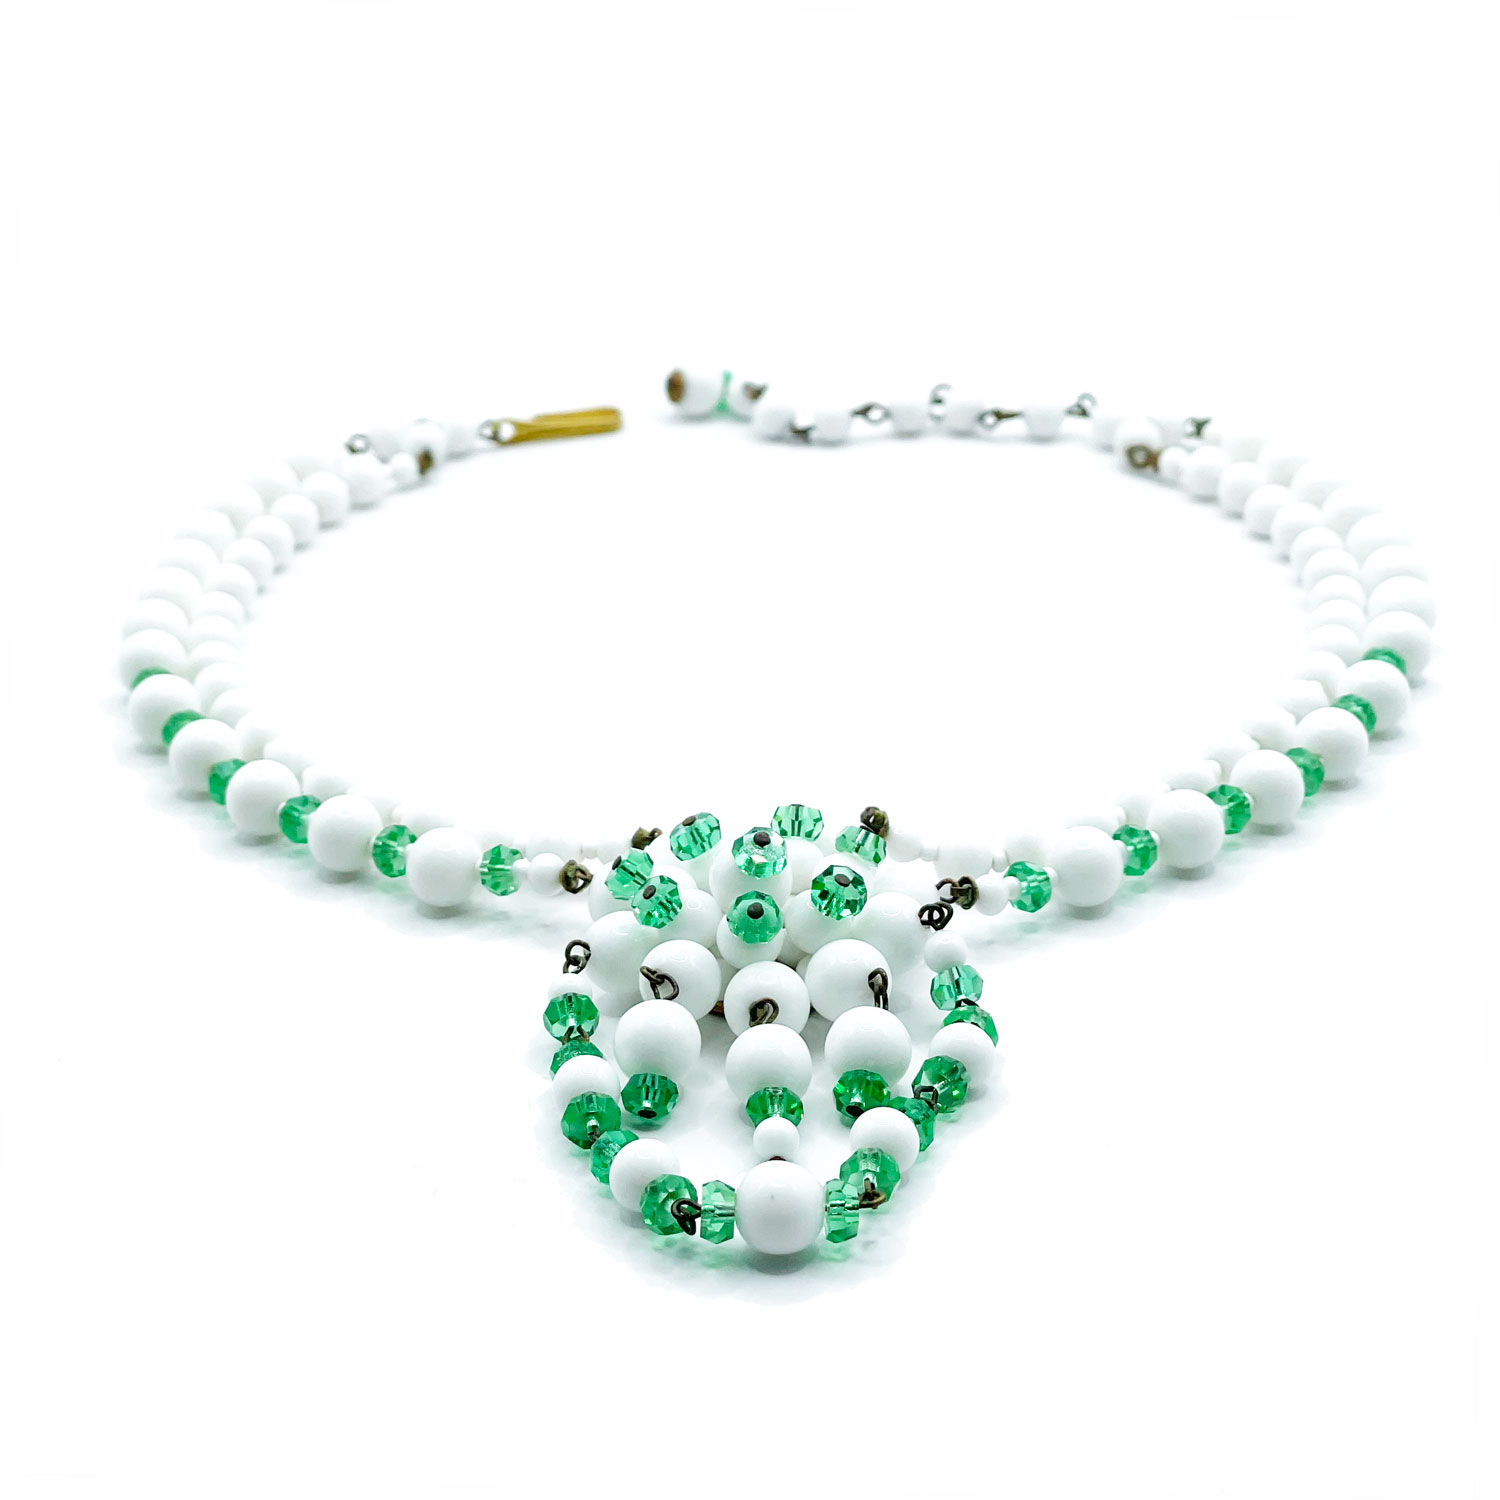 White glass bead necklace